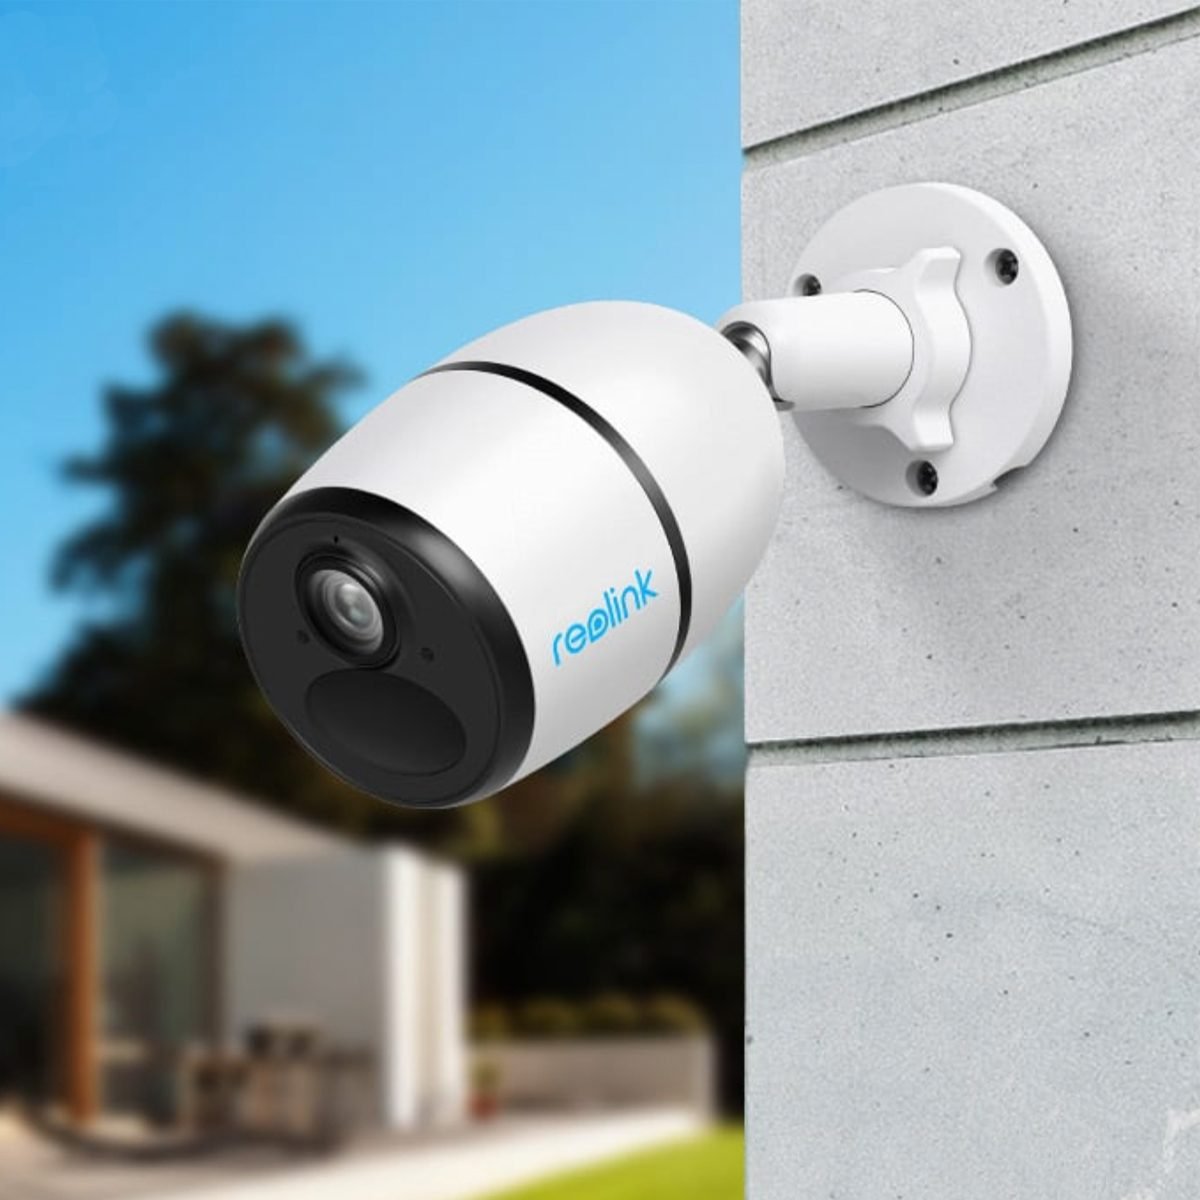 Is There a Security Camera That Works Without Wi-Fi?